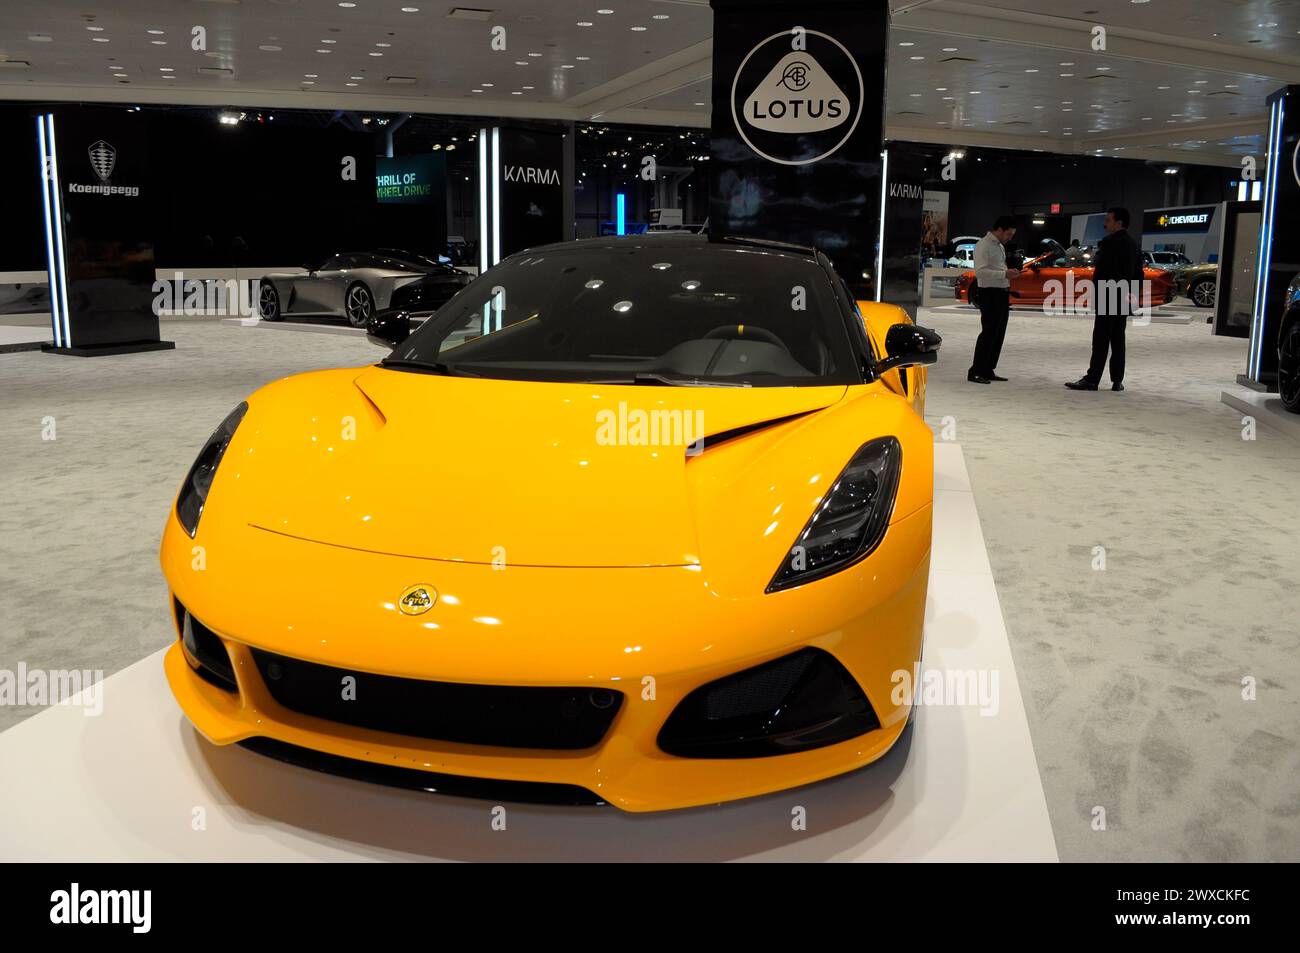 New York, United States. 28th Mar, 2024. A Lotus vehicle is seen on the second media day at the 2024 New York International Auto Show in the Jacob K. Javits Convention Center. The annual NYIAS in Manhattan, New York City featured various car companies, debuts of new vehicles and automobile industry professionals. The show which opens to the public on March 29 and ends on April 7, attracts thousands of car enthusiasts. The NYIAS began in 1900 showcasing automobiles and examples of future car technology. (Photo by Jimin Kim/SOPA Images/Sipa USA) Credit: Sipa USA/Alamy Live News Stock Photo